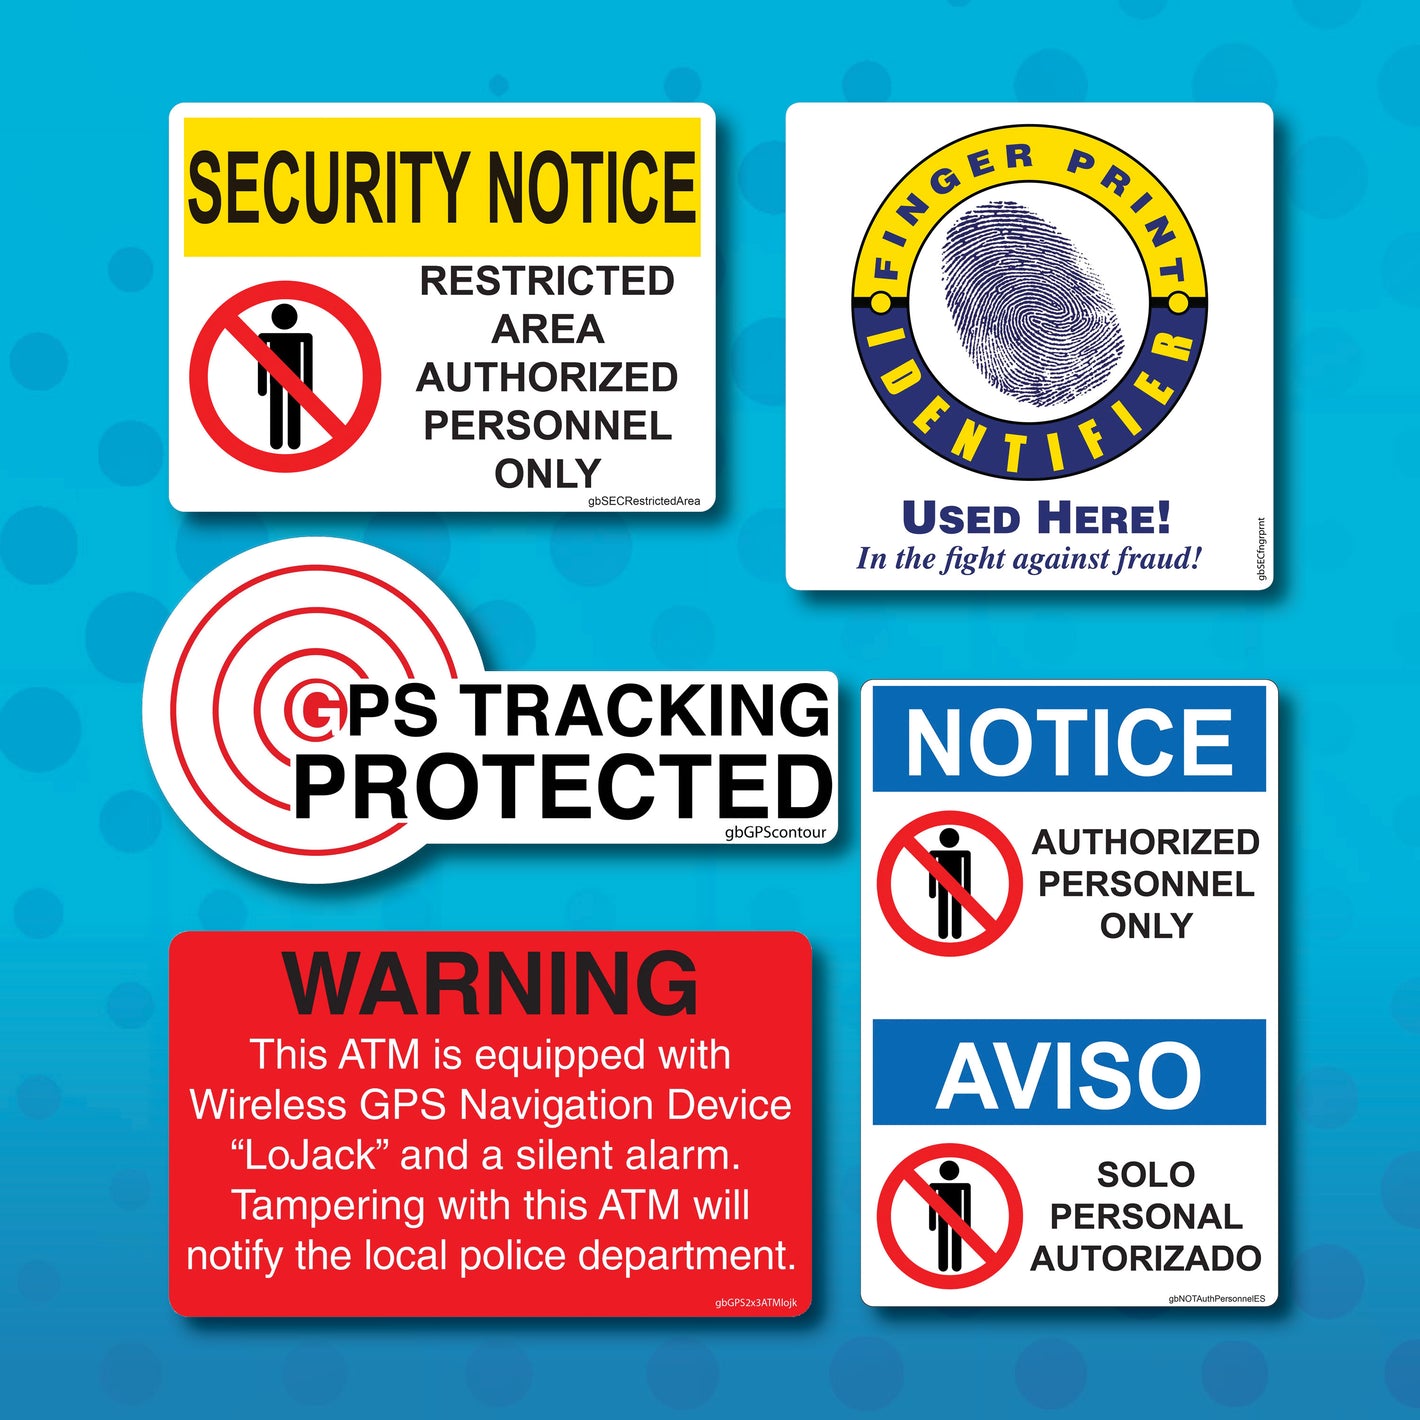 Let your customers know you care about security with decals.